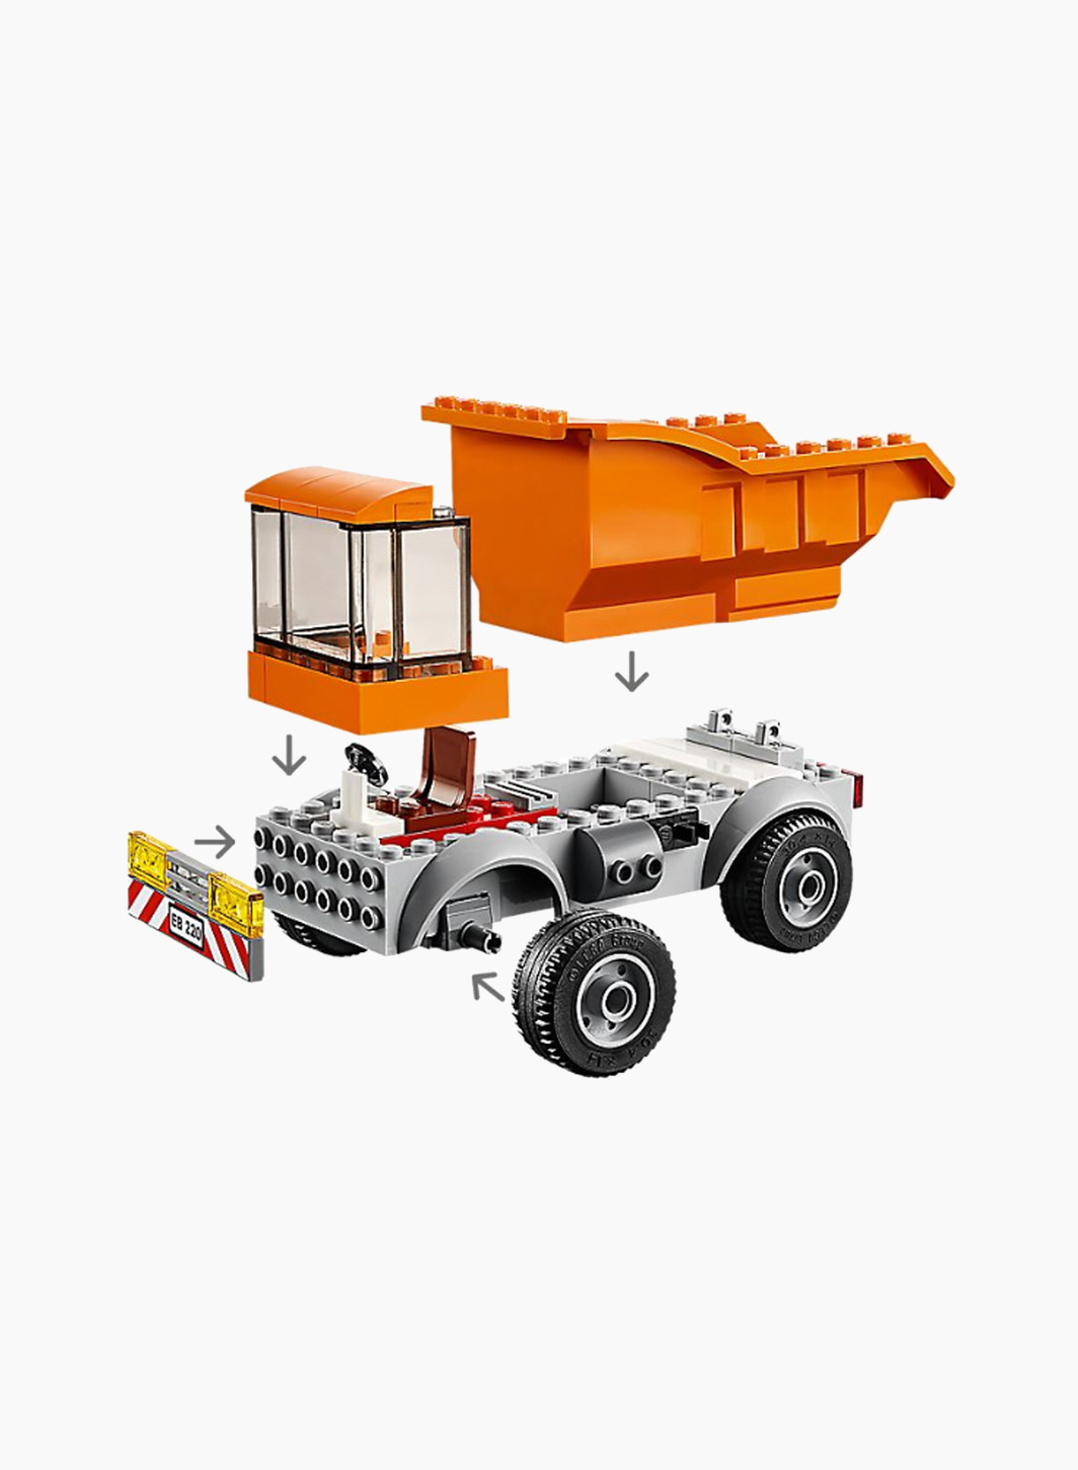 Lego City Constructor Garbage Truck